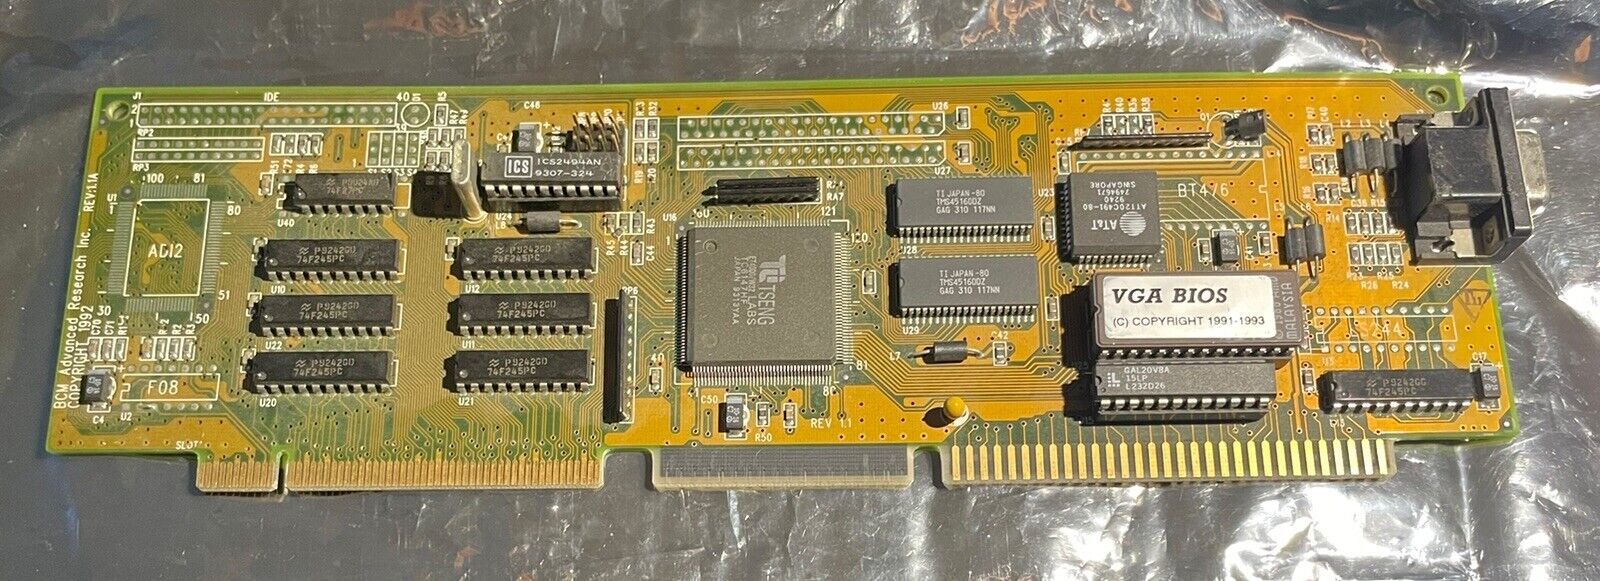 Vintage BCM Advanced Research Inc 1.1a Graphics Card w/original Price Tag